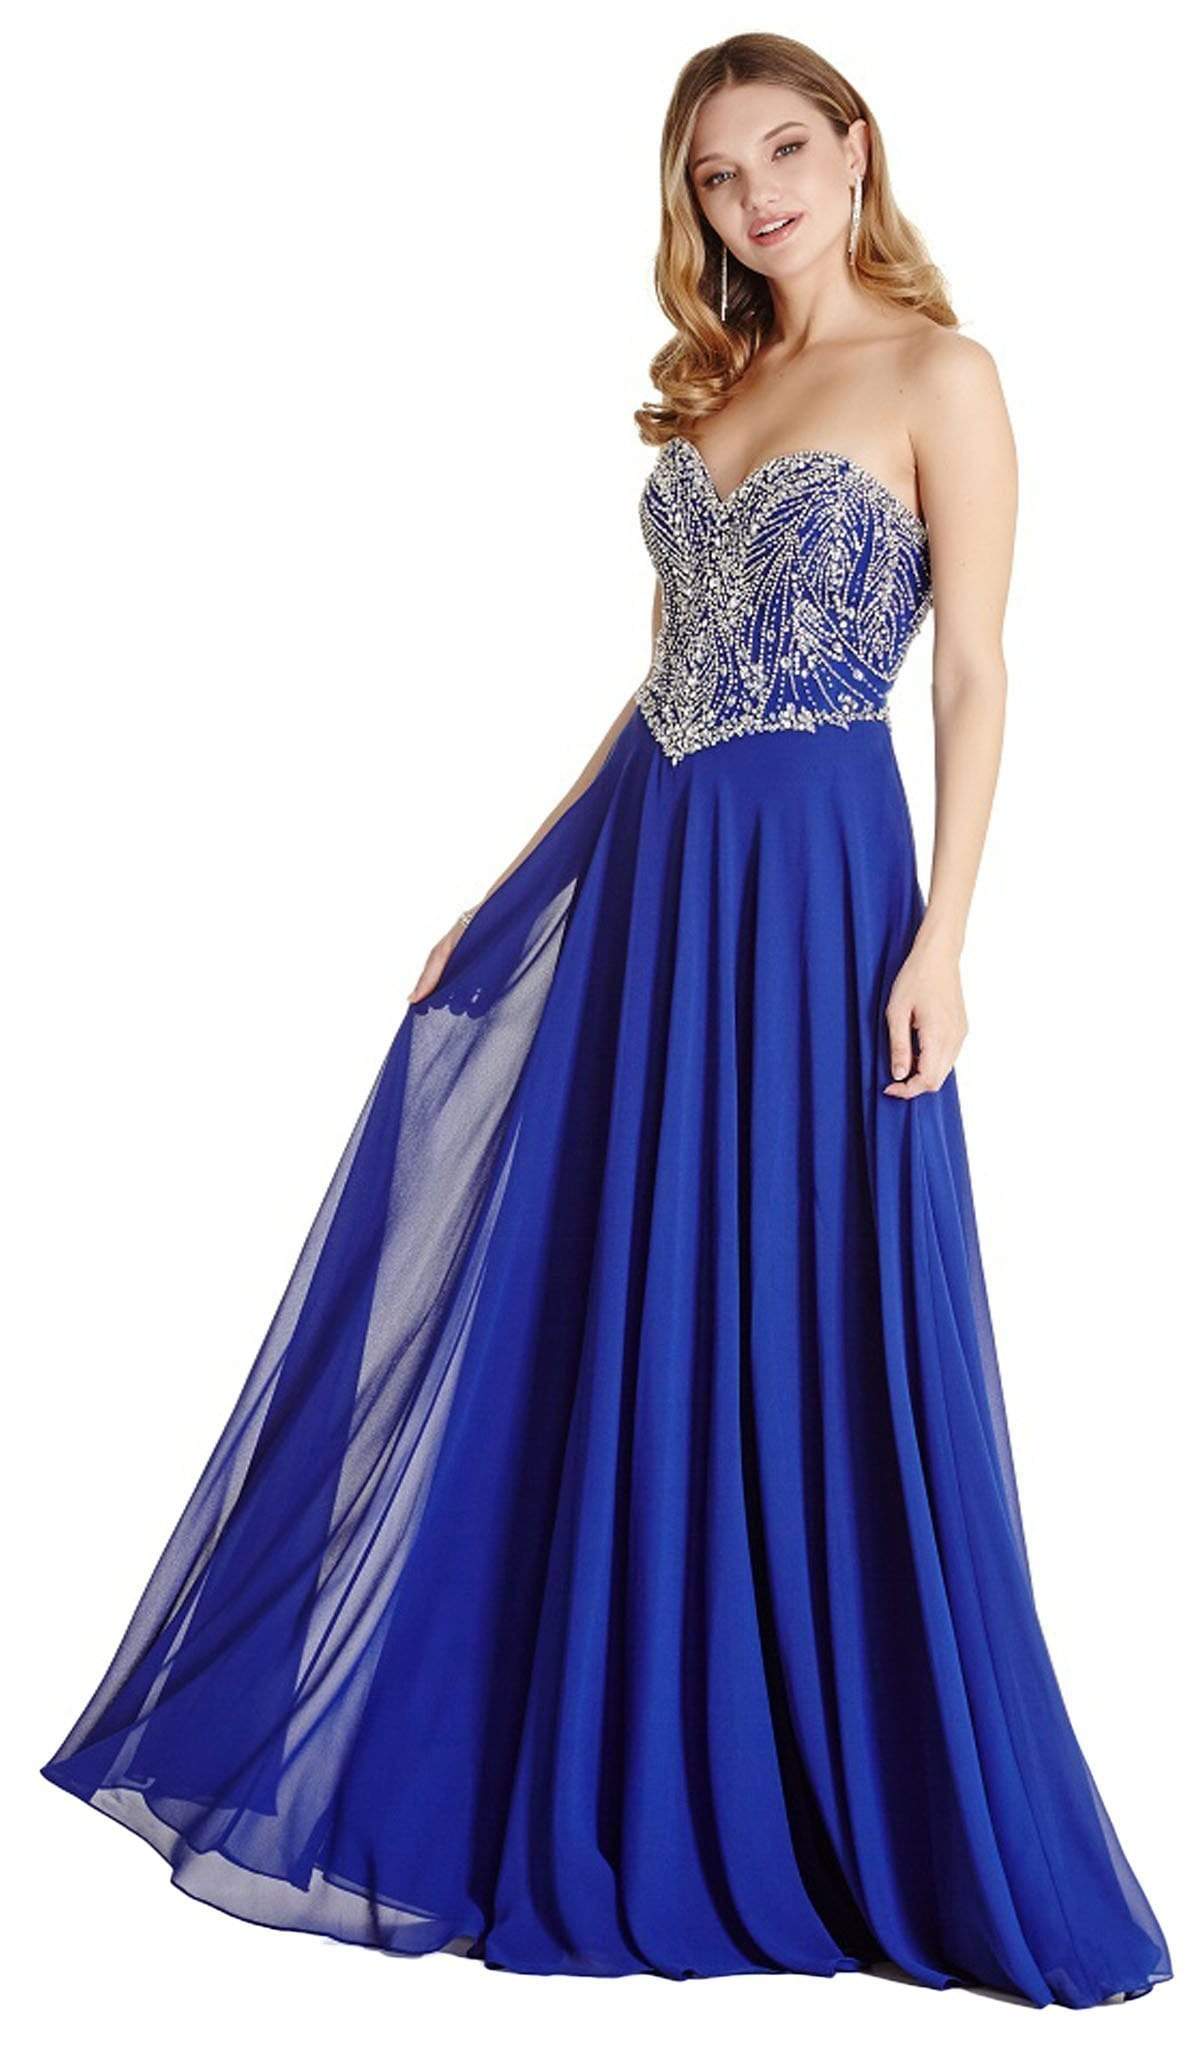 Aspeed Design - Bedazzled Sweetheart Prom Dress
